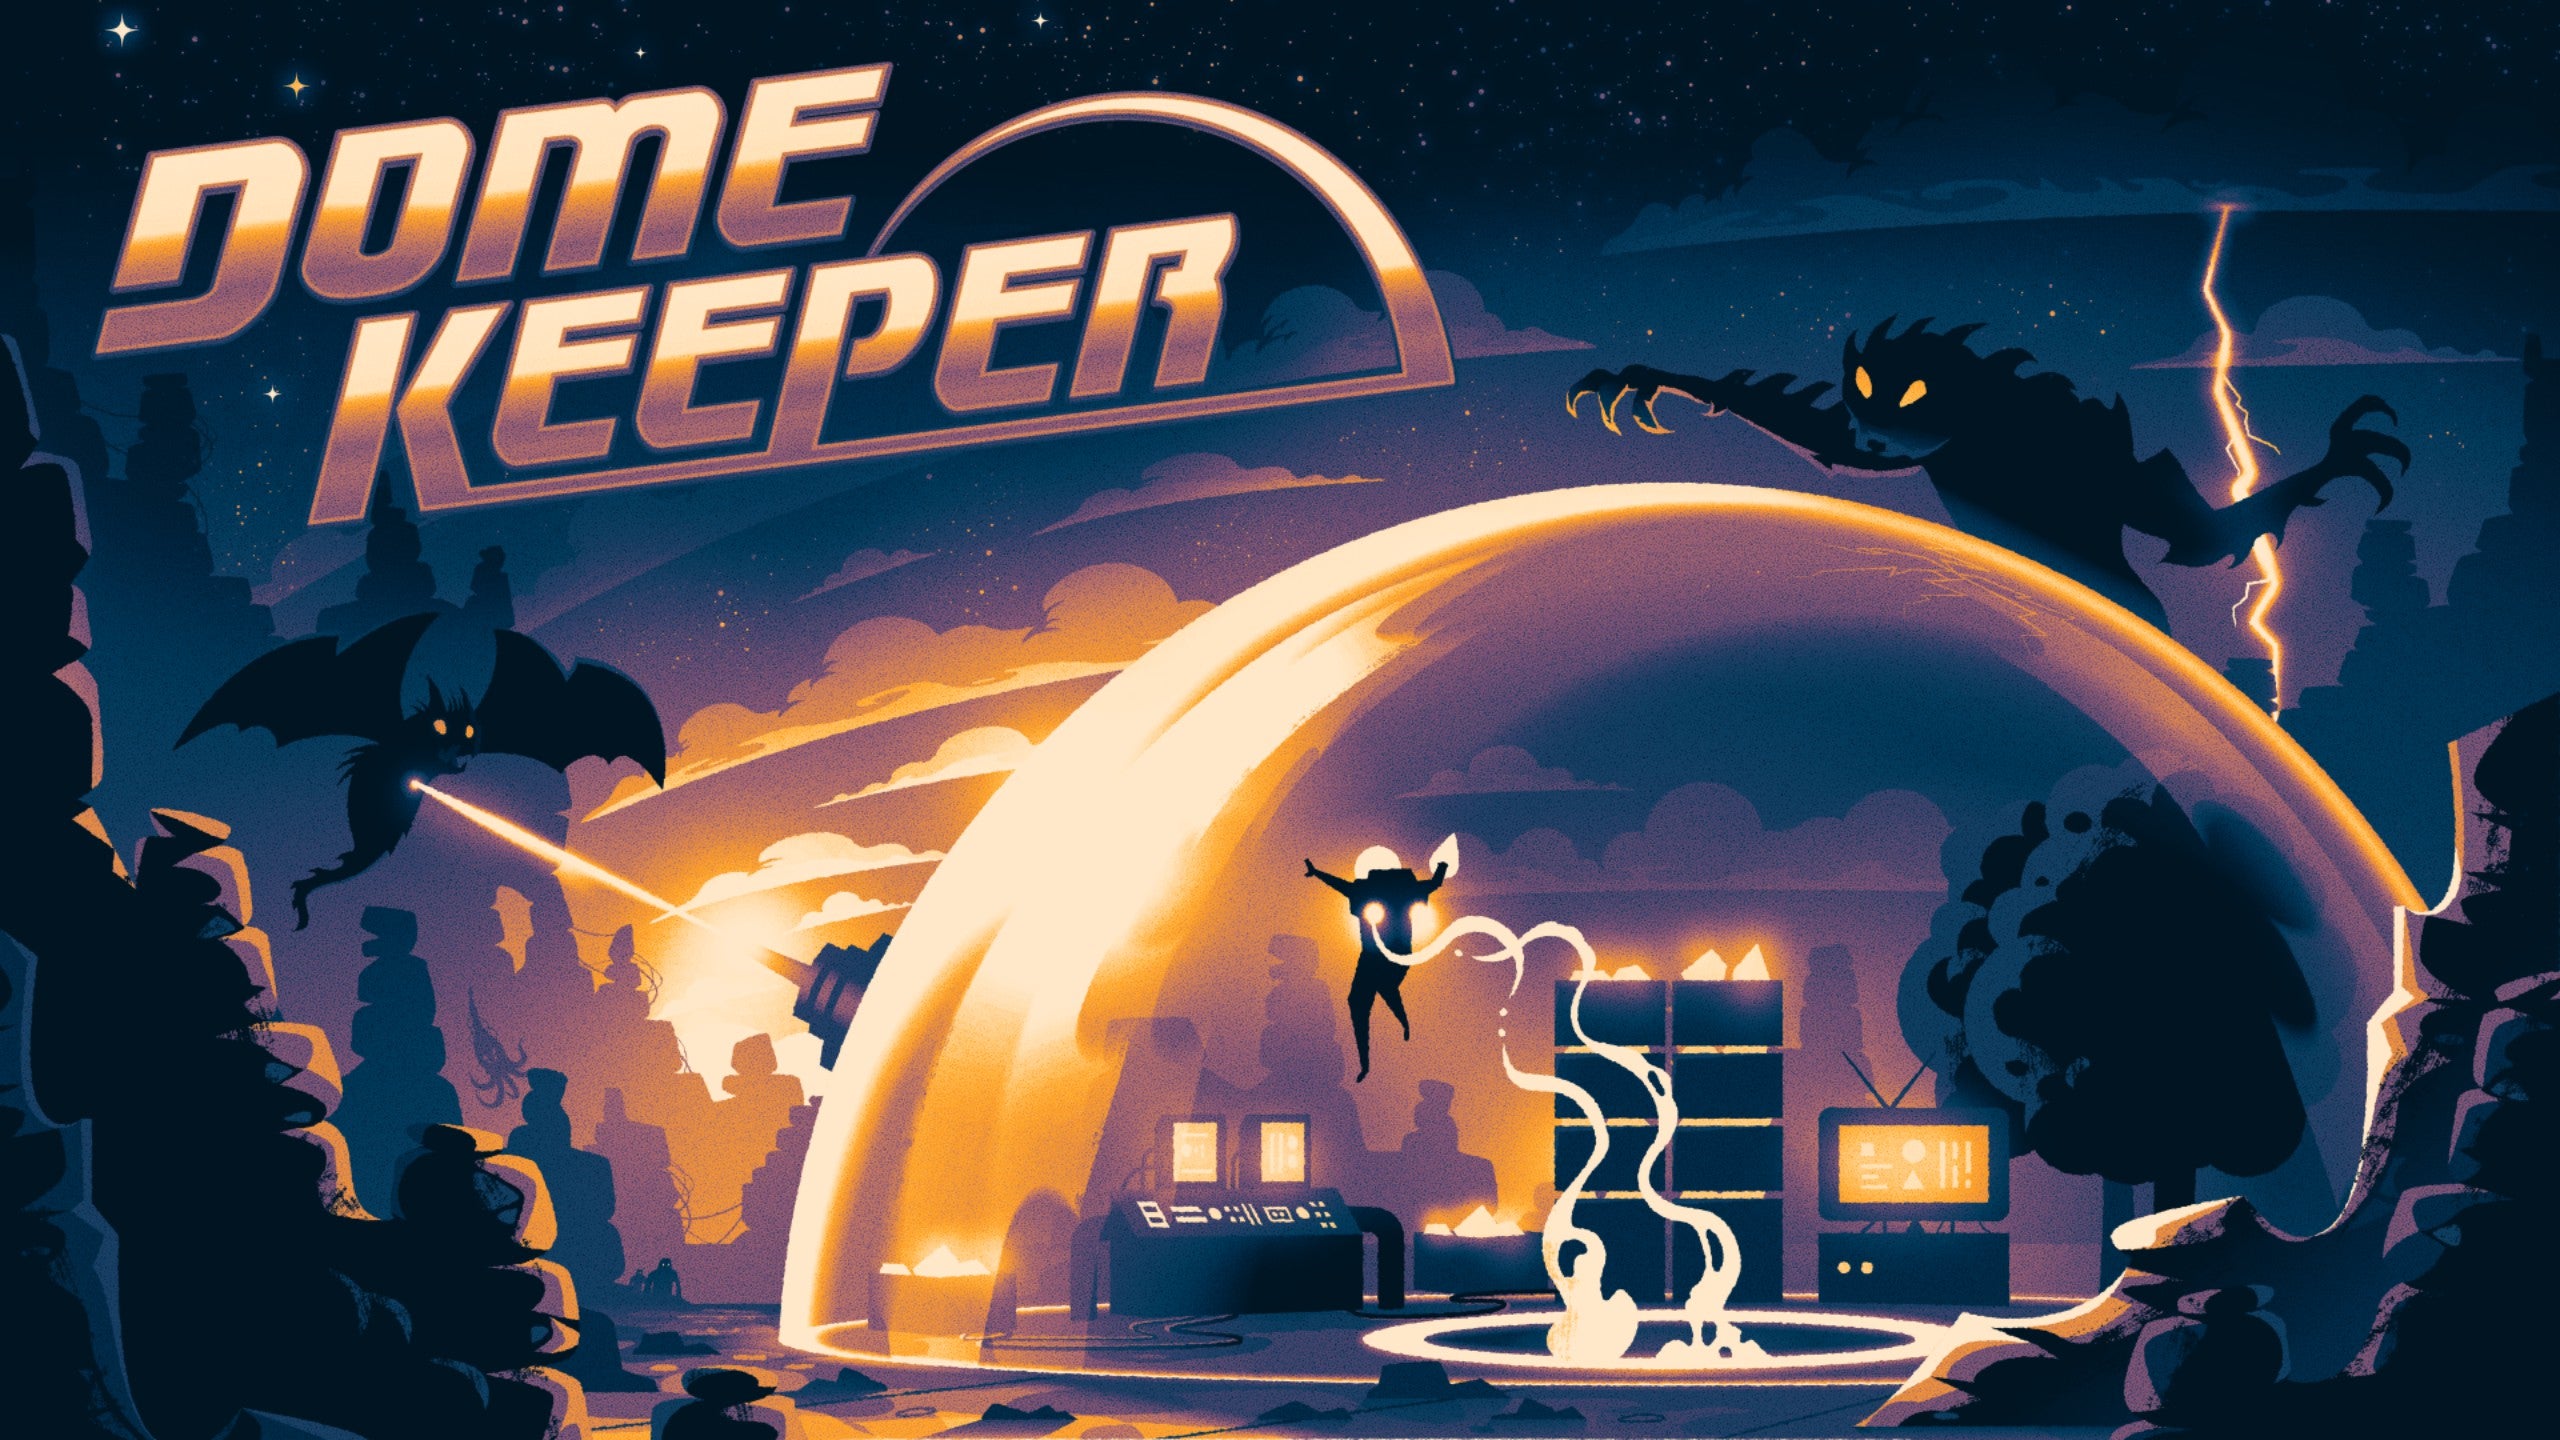 The Dome Keeper title screen.  Shadowy monsters attack a glass-domed space base.